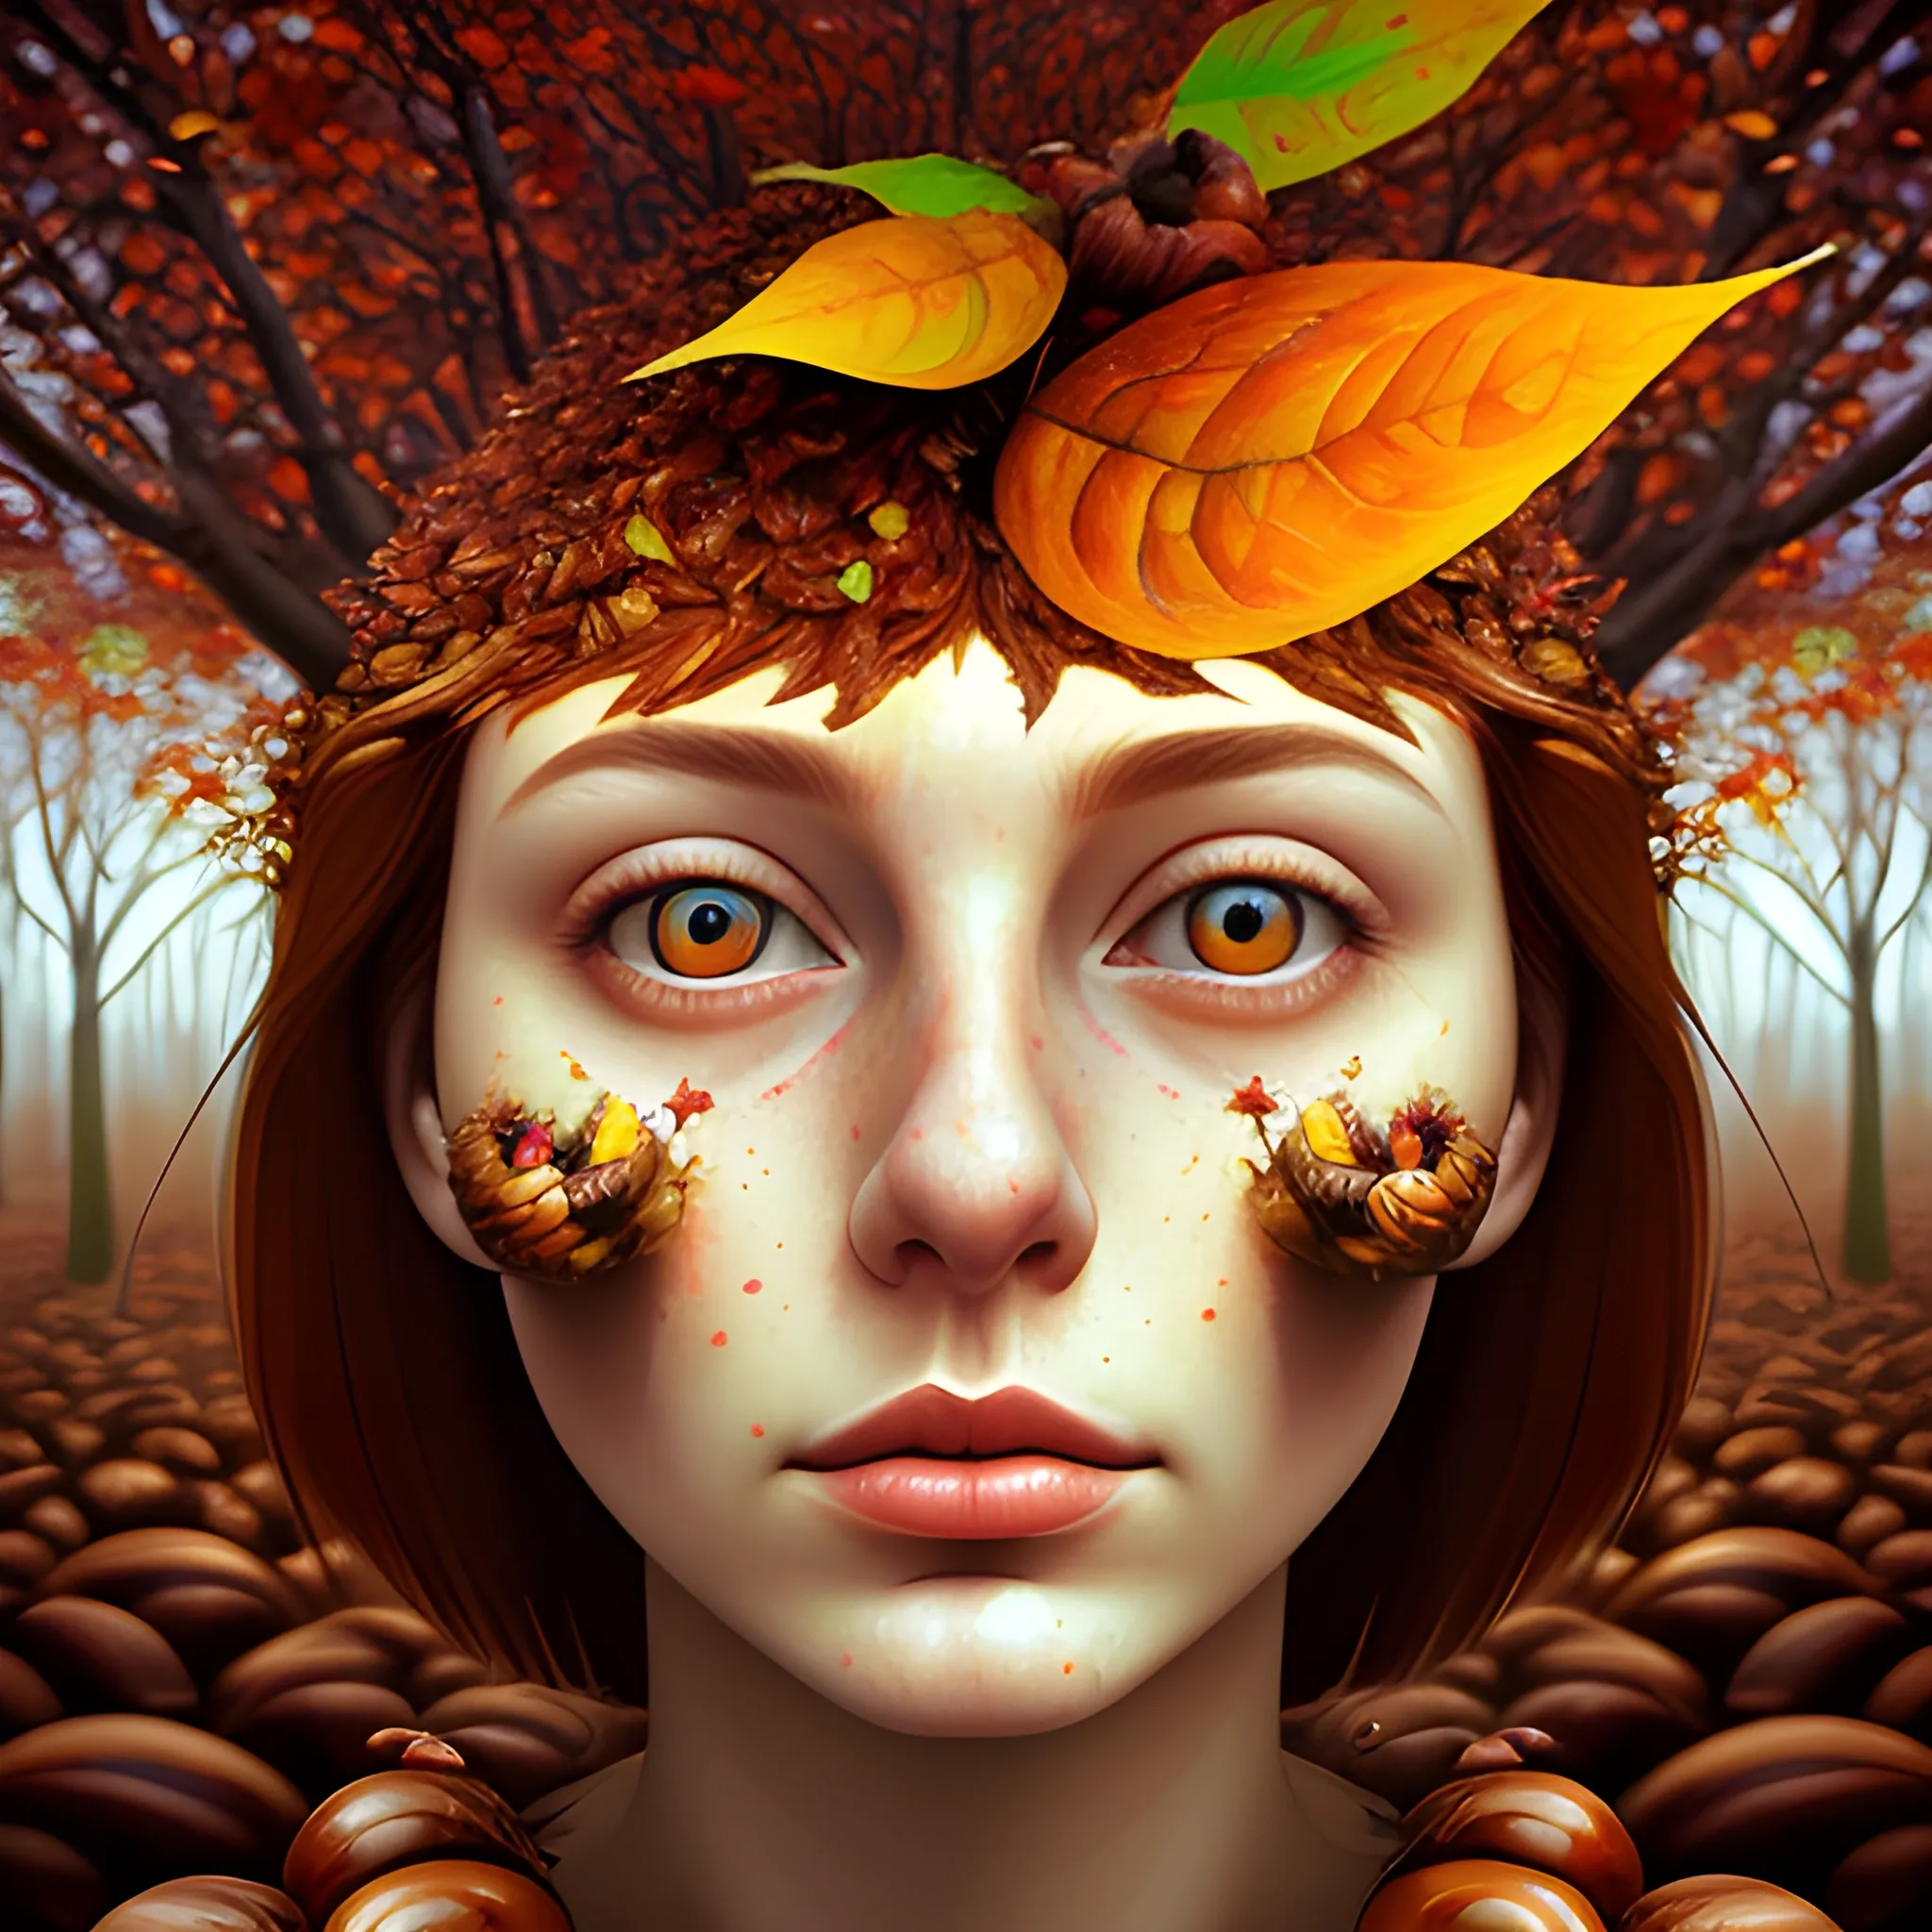 make a chestnut look like a female human face, close up, saturated colors, surrealism, chaotic background many chestnuts and chestnut leaves floating around  3D, Trippy, eerie atmosphere, close up, illustration, angular perspective, Oil Painting, Oil Painting